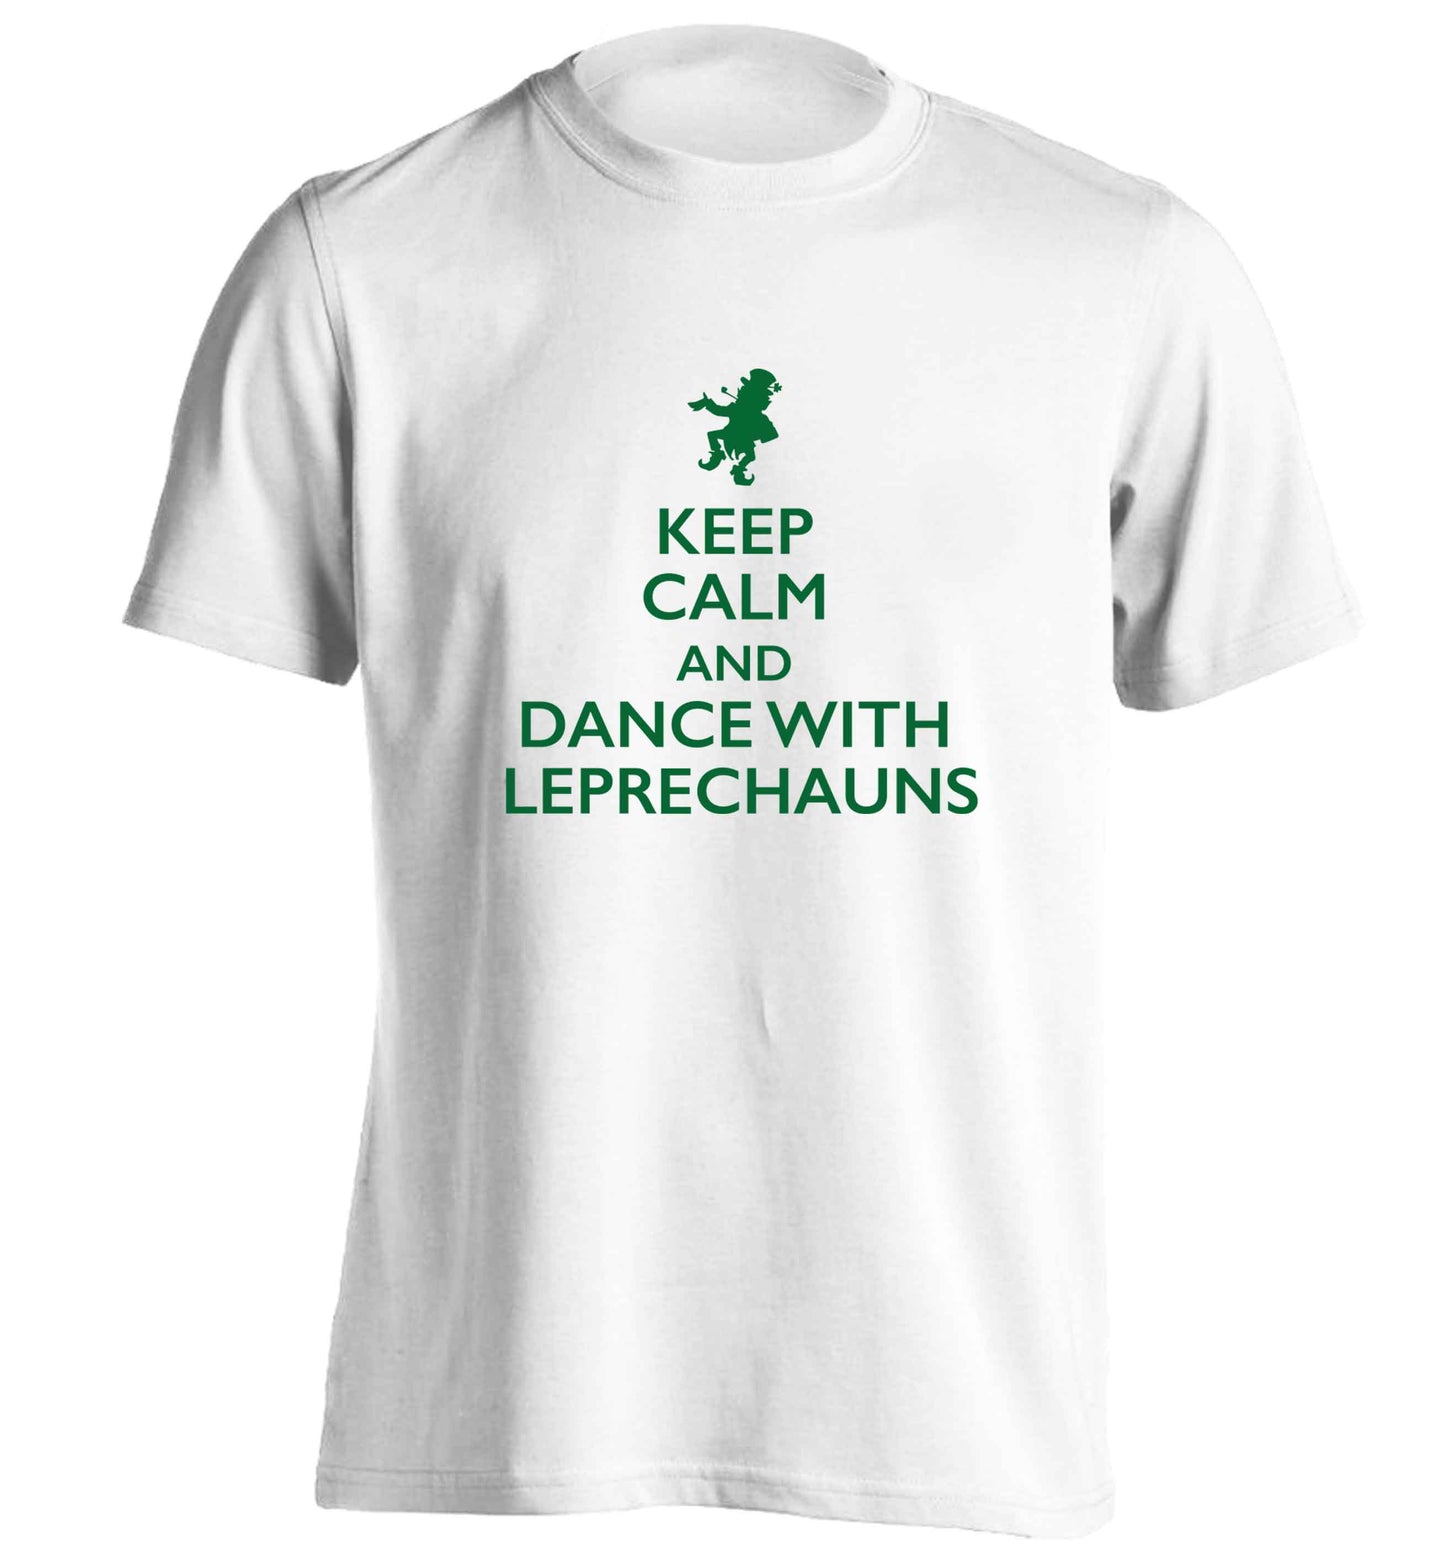 Keep calm and dance with leprechauns adults unisex white Tshirt 2XL